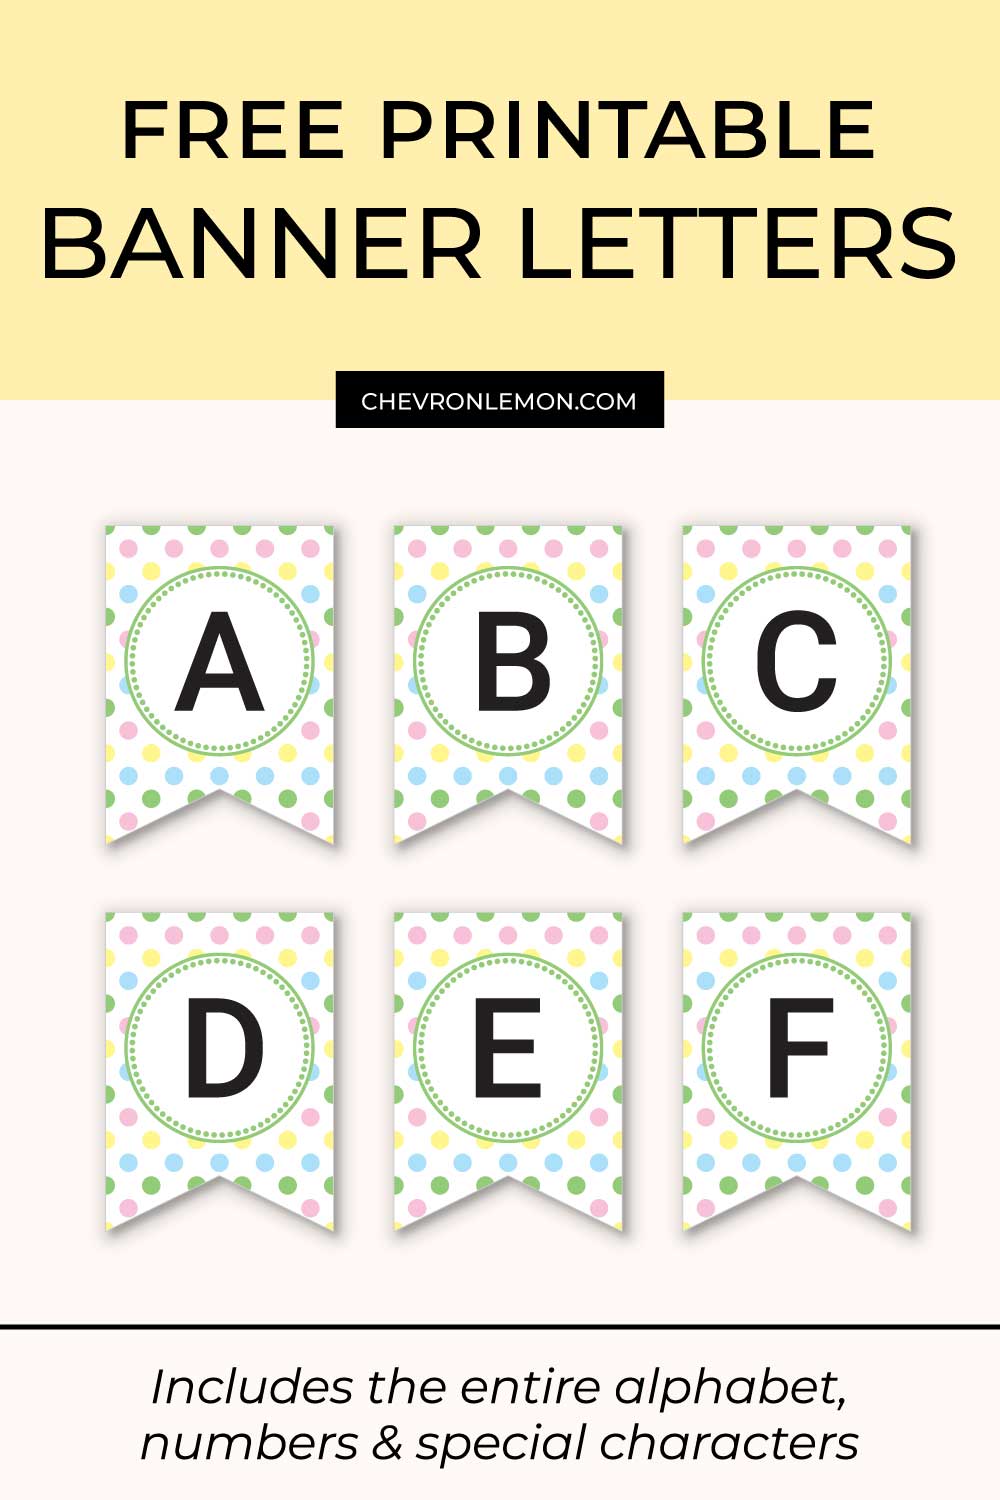 Free printable letter banner pin